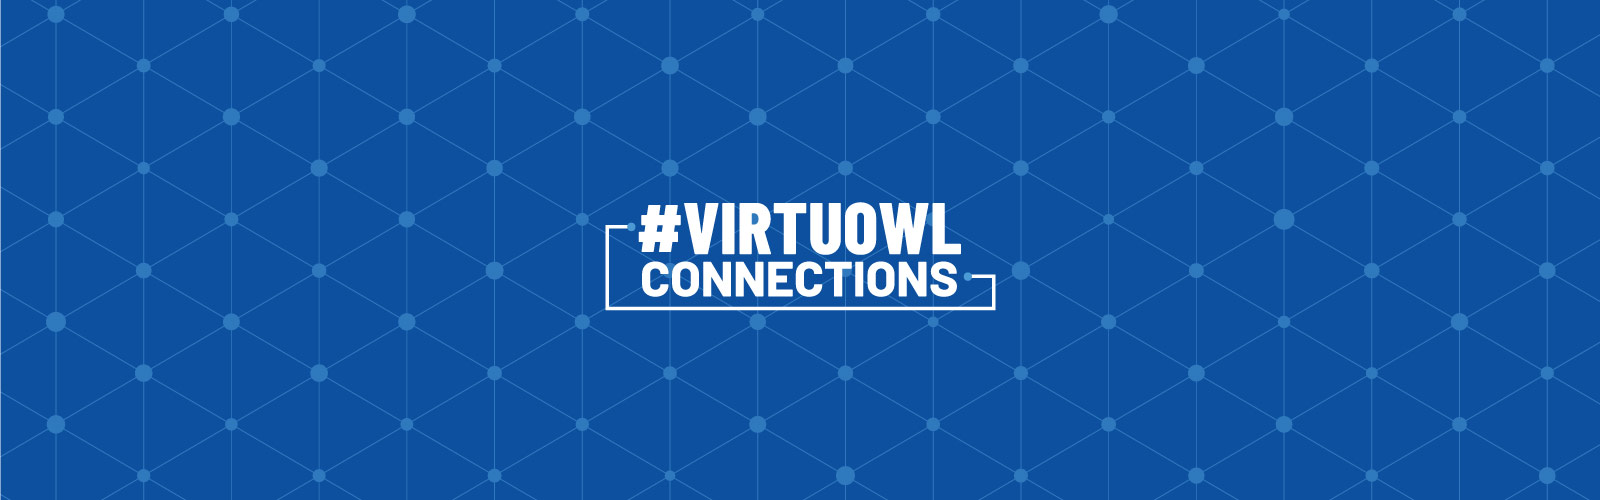 VirtuOWL Connections